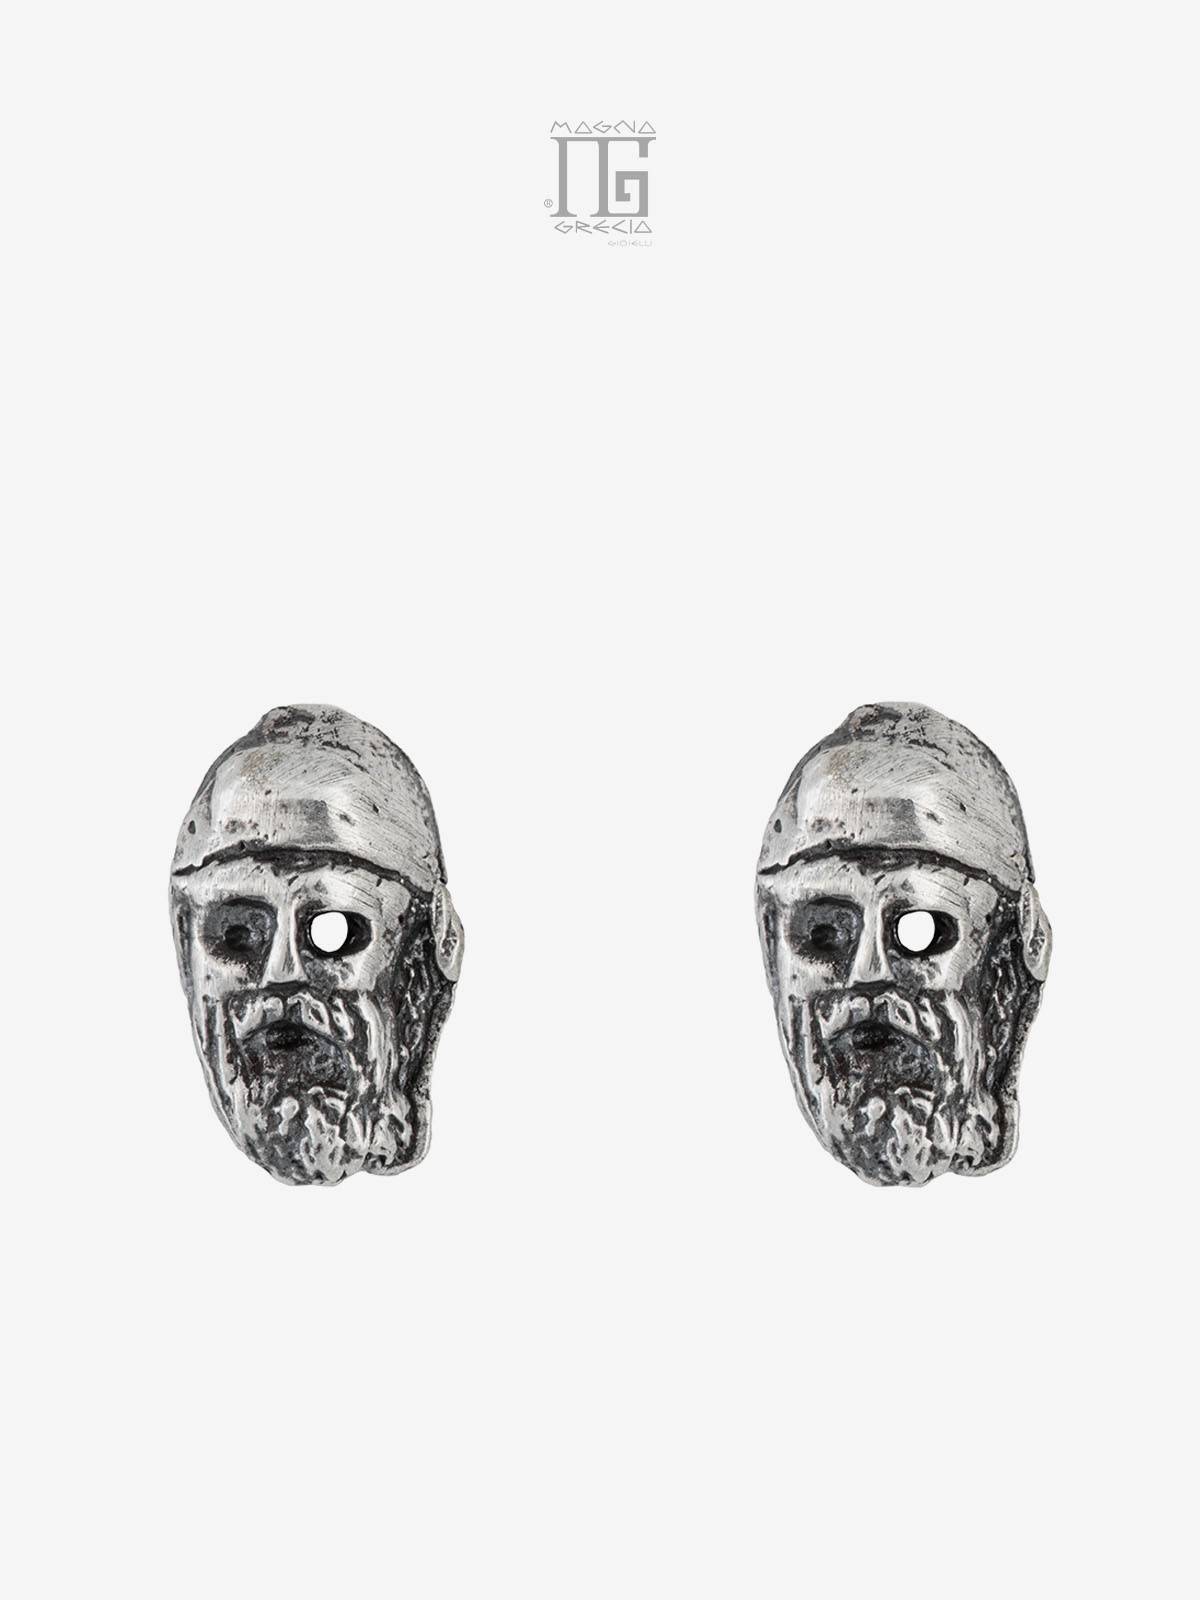 Silver earrings depicting the face of the Riace Bronze B Cod. MGK 3841 V